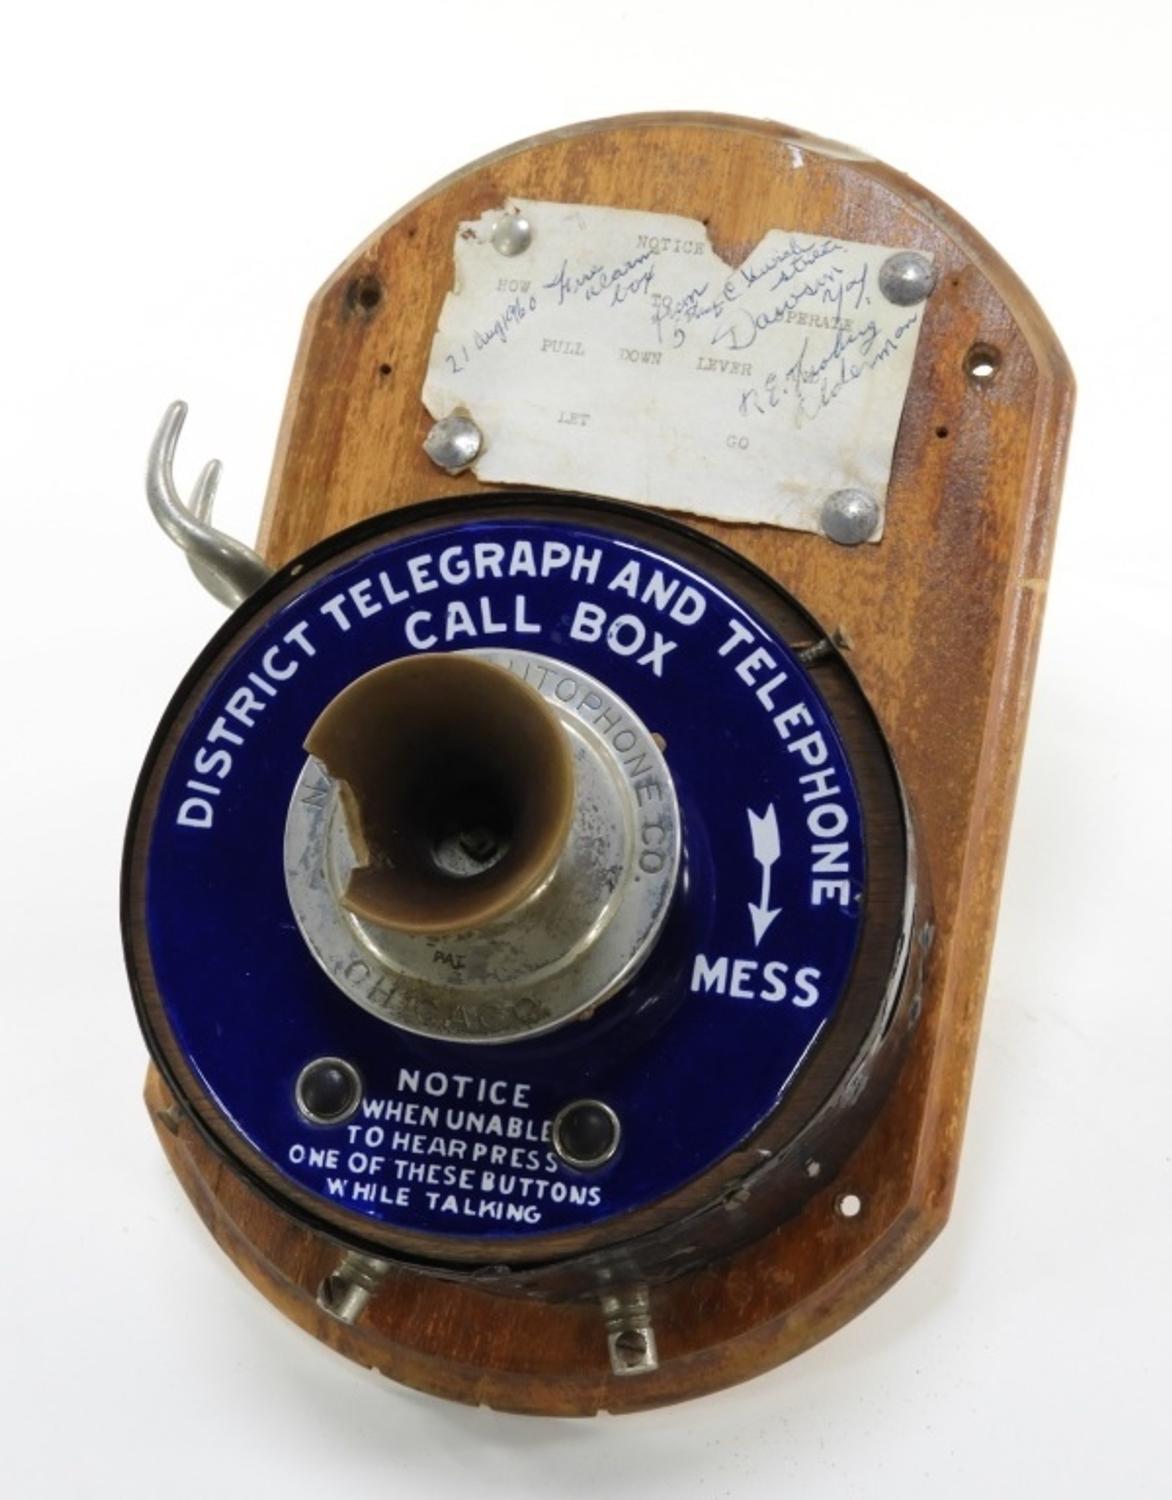 Alexander Bell 1st Long Distance Membrane Receiver sold at auction